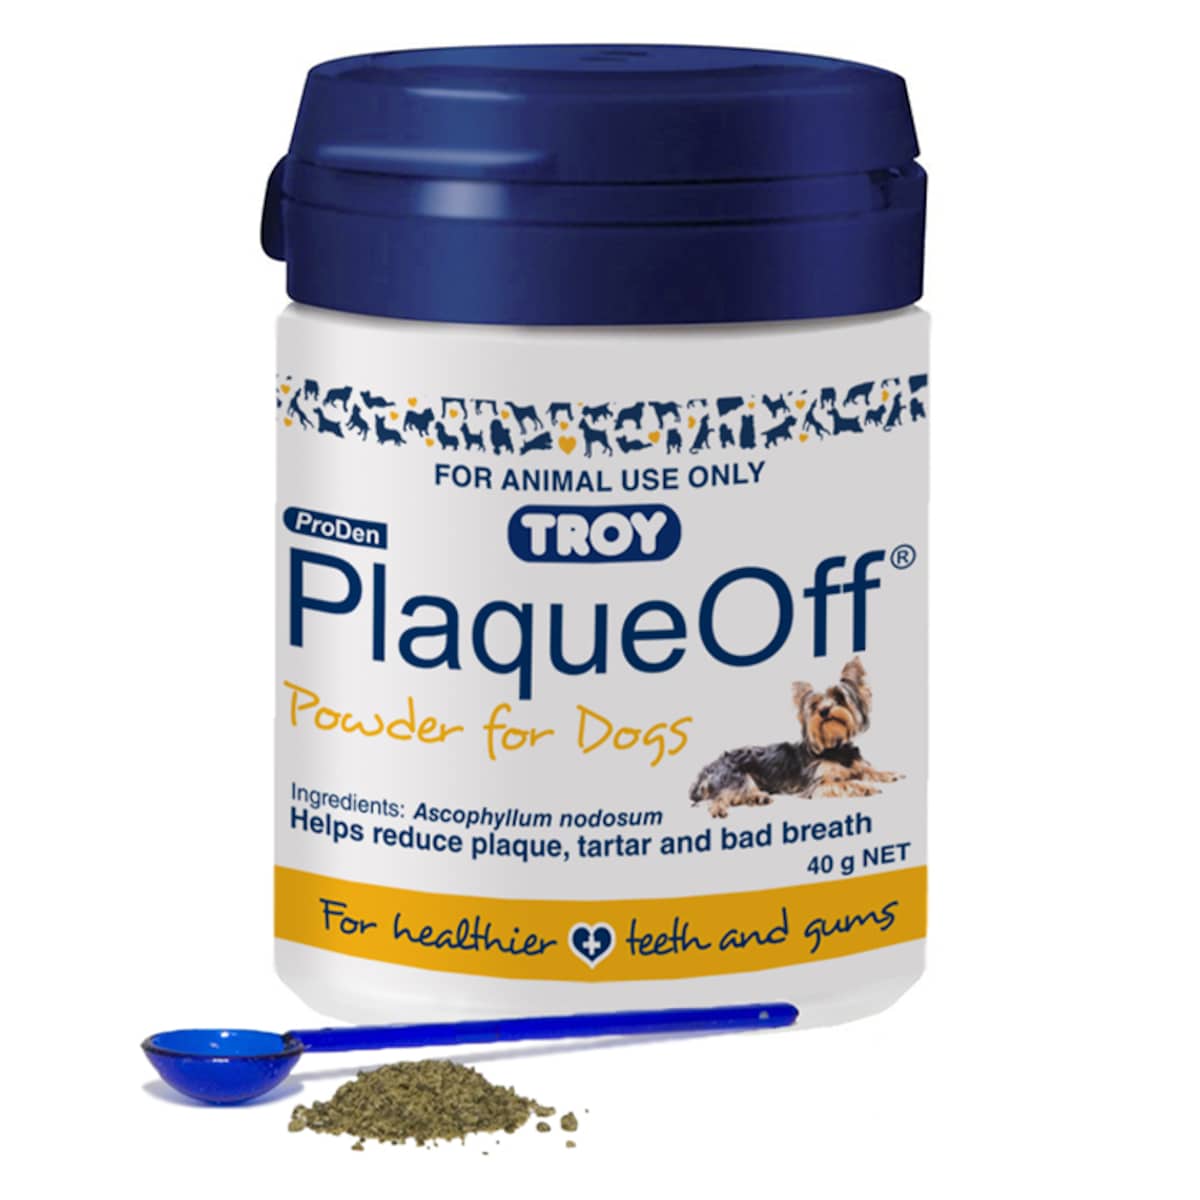 Troy ProDen PlaqueOff Powder for Dogs 40g